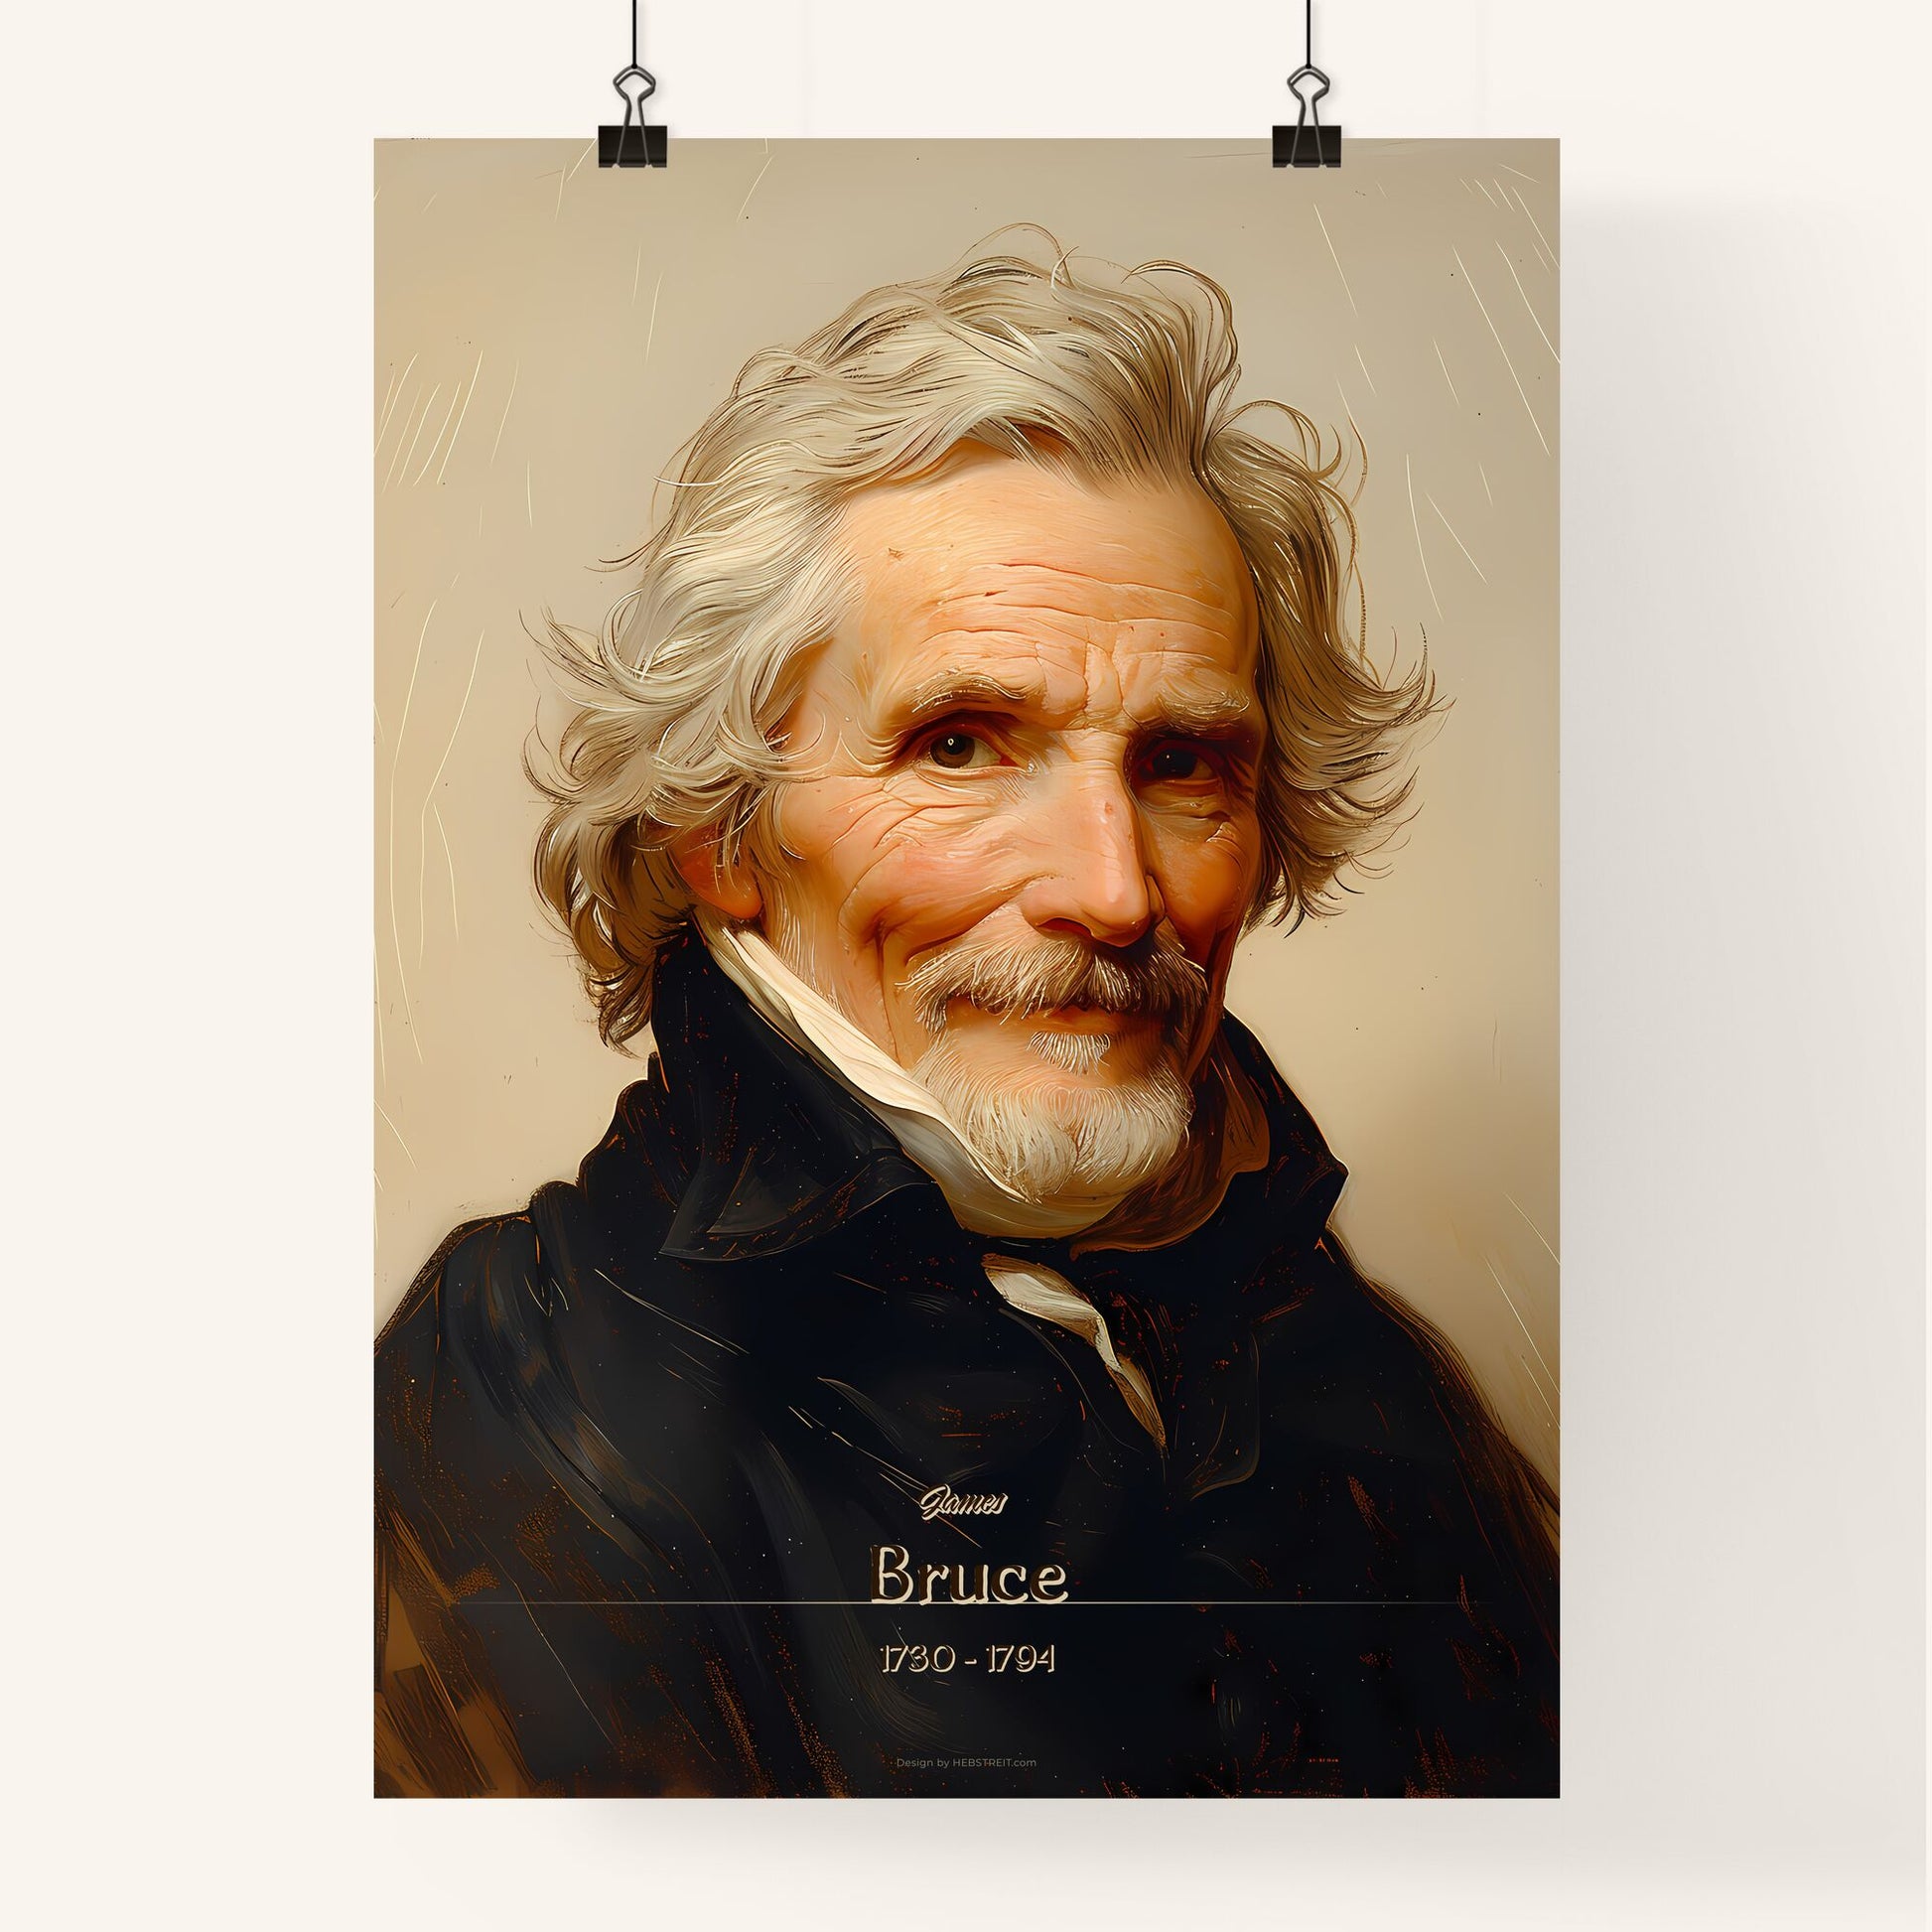 James, Bruce, 1730 - 1794, A Poster of a man with white hair and a beard Default Title